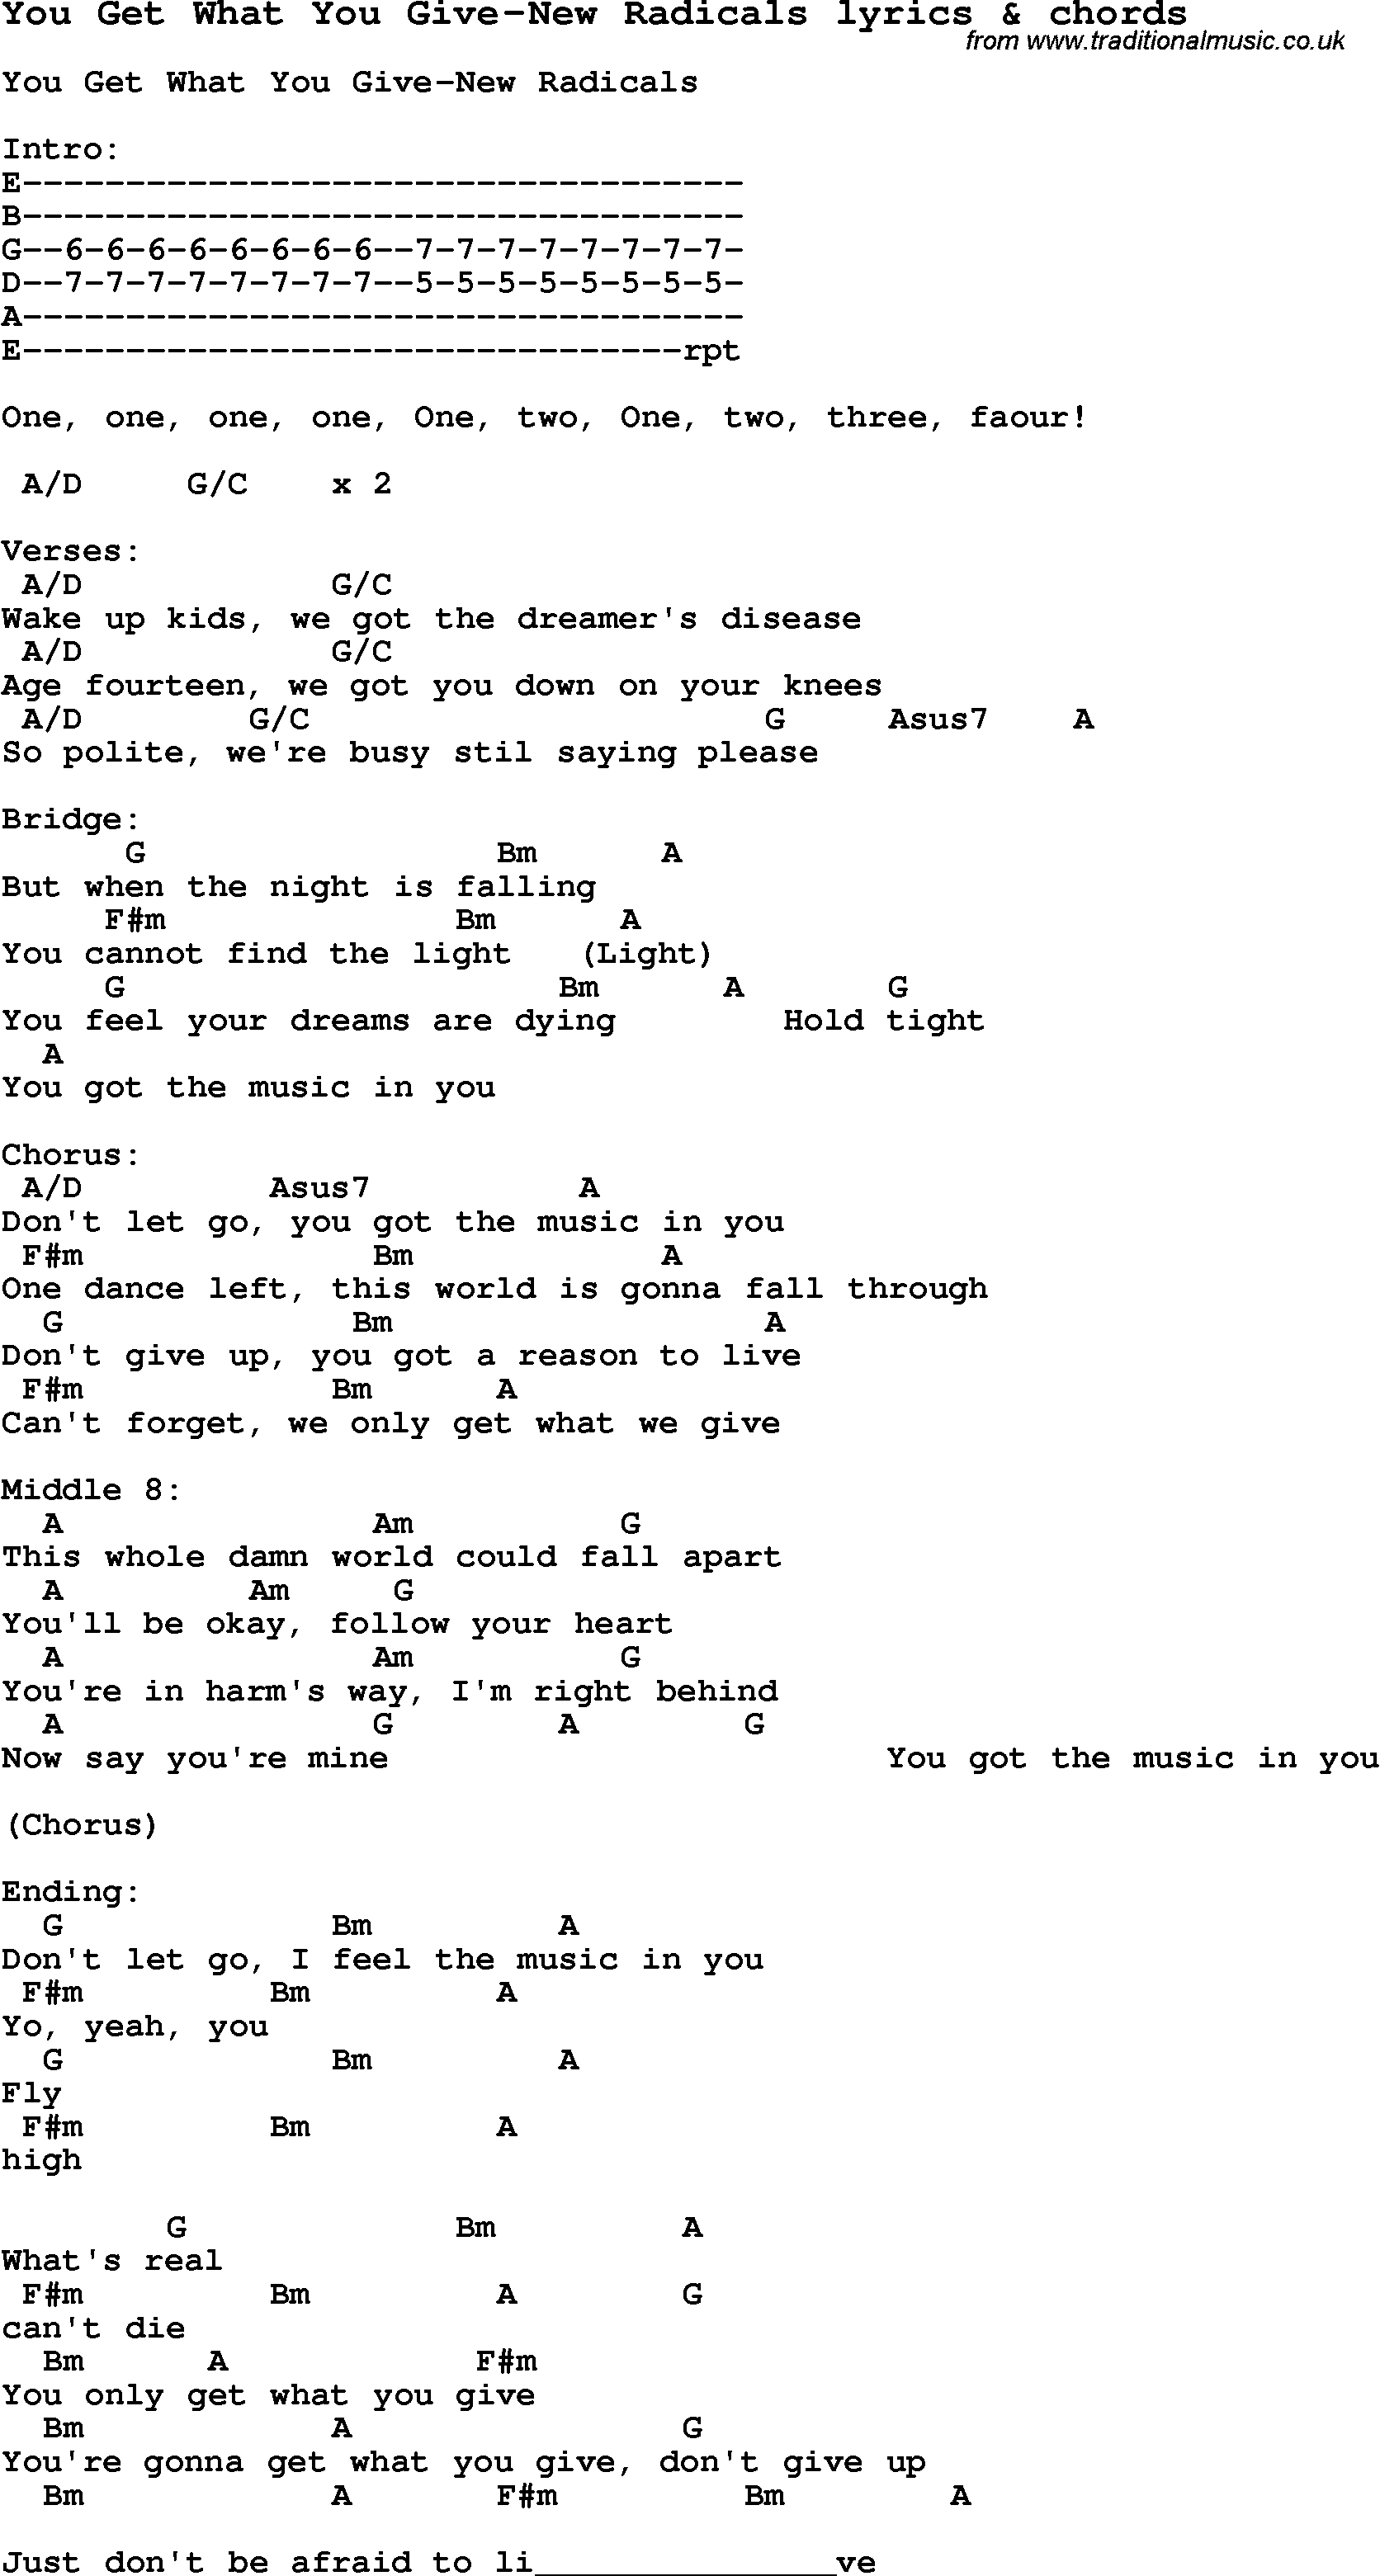 Love Song Lyrics for: You Get What You Give-New Radicals with chords for Ukulele, Guitar Banjo etc.